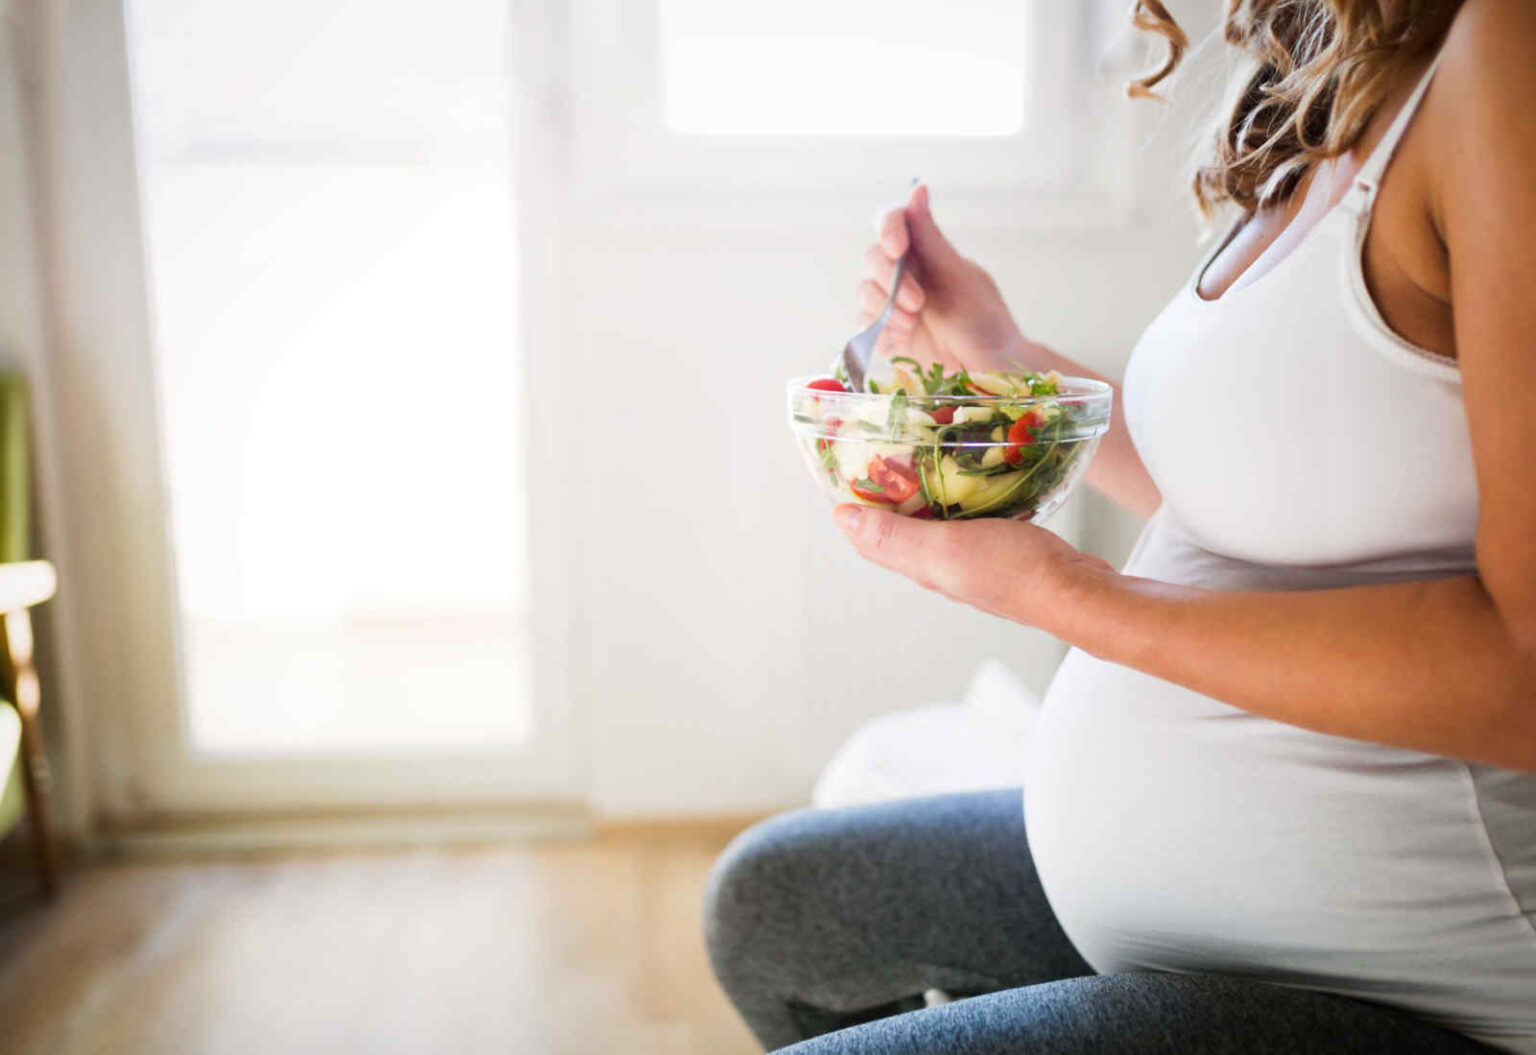 Getting your body ready to give birth to a child can be stressful and overwhelming for anyone! Here's how you can stay healthy during pregnancy.